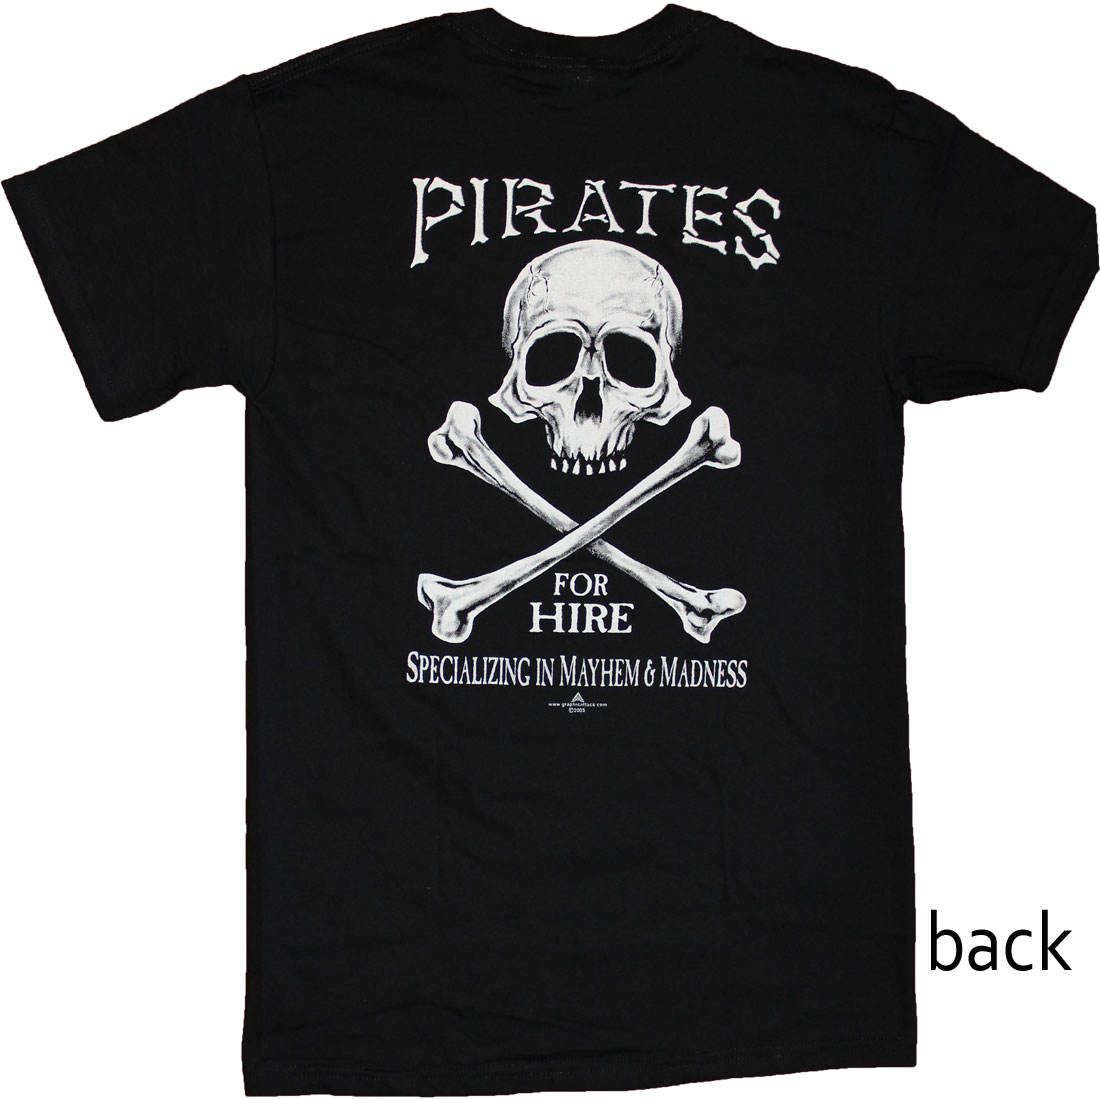 Buy Pirates for Hire Cotton T-Shirt | Flagline